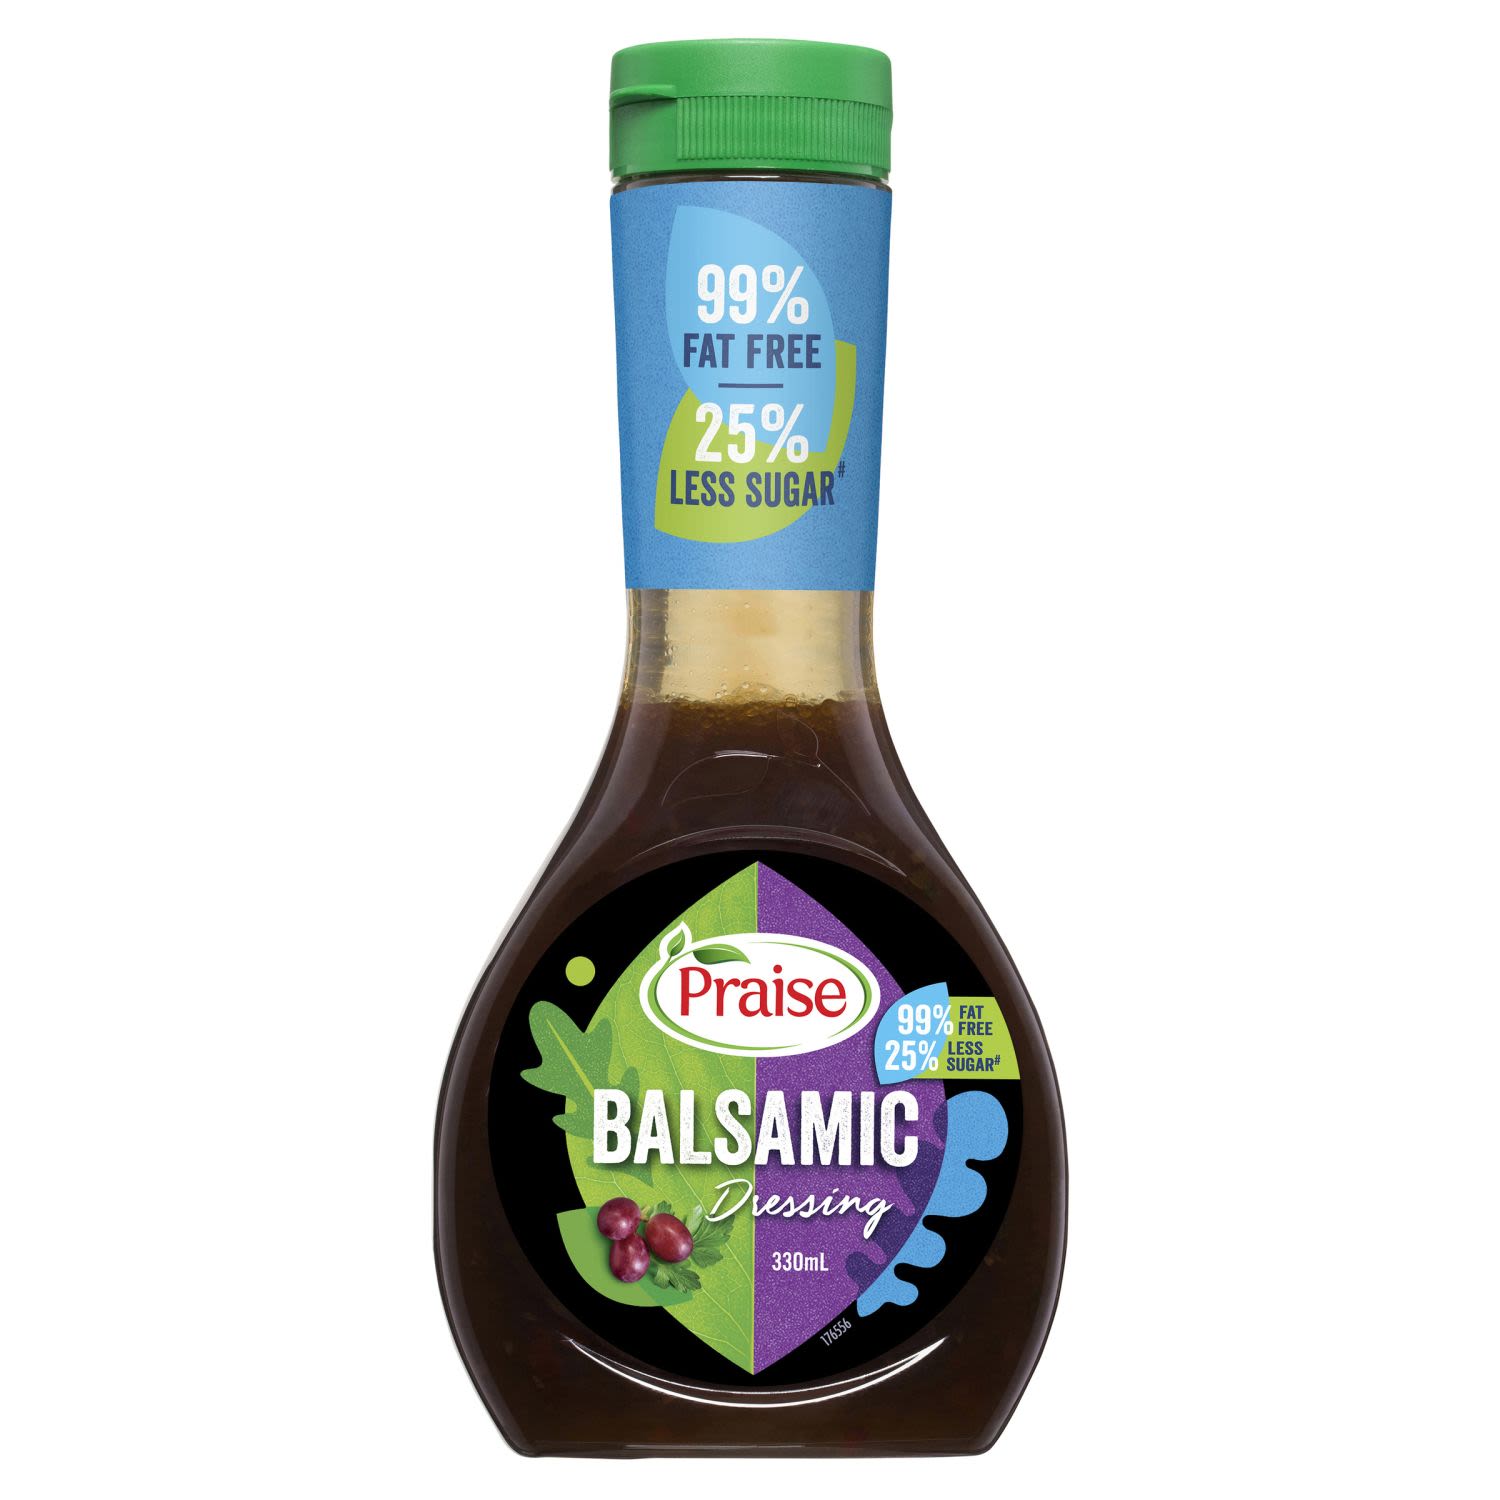 Praise Balsamic Dressing will enhance the taste of any simple salad, delighting your dinner guests. Drizzle on roasted veggies, garden salads, or protein based salads. it's big on flavour but 99% fat free.<br /> <br /><br />Allergen may be present: Soy|Sulphites <br /><br />Country of Origin: Made in Australia from at least 70% Australian ingredients